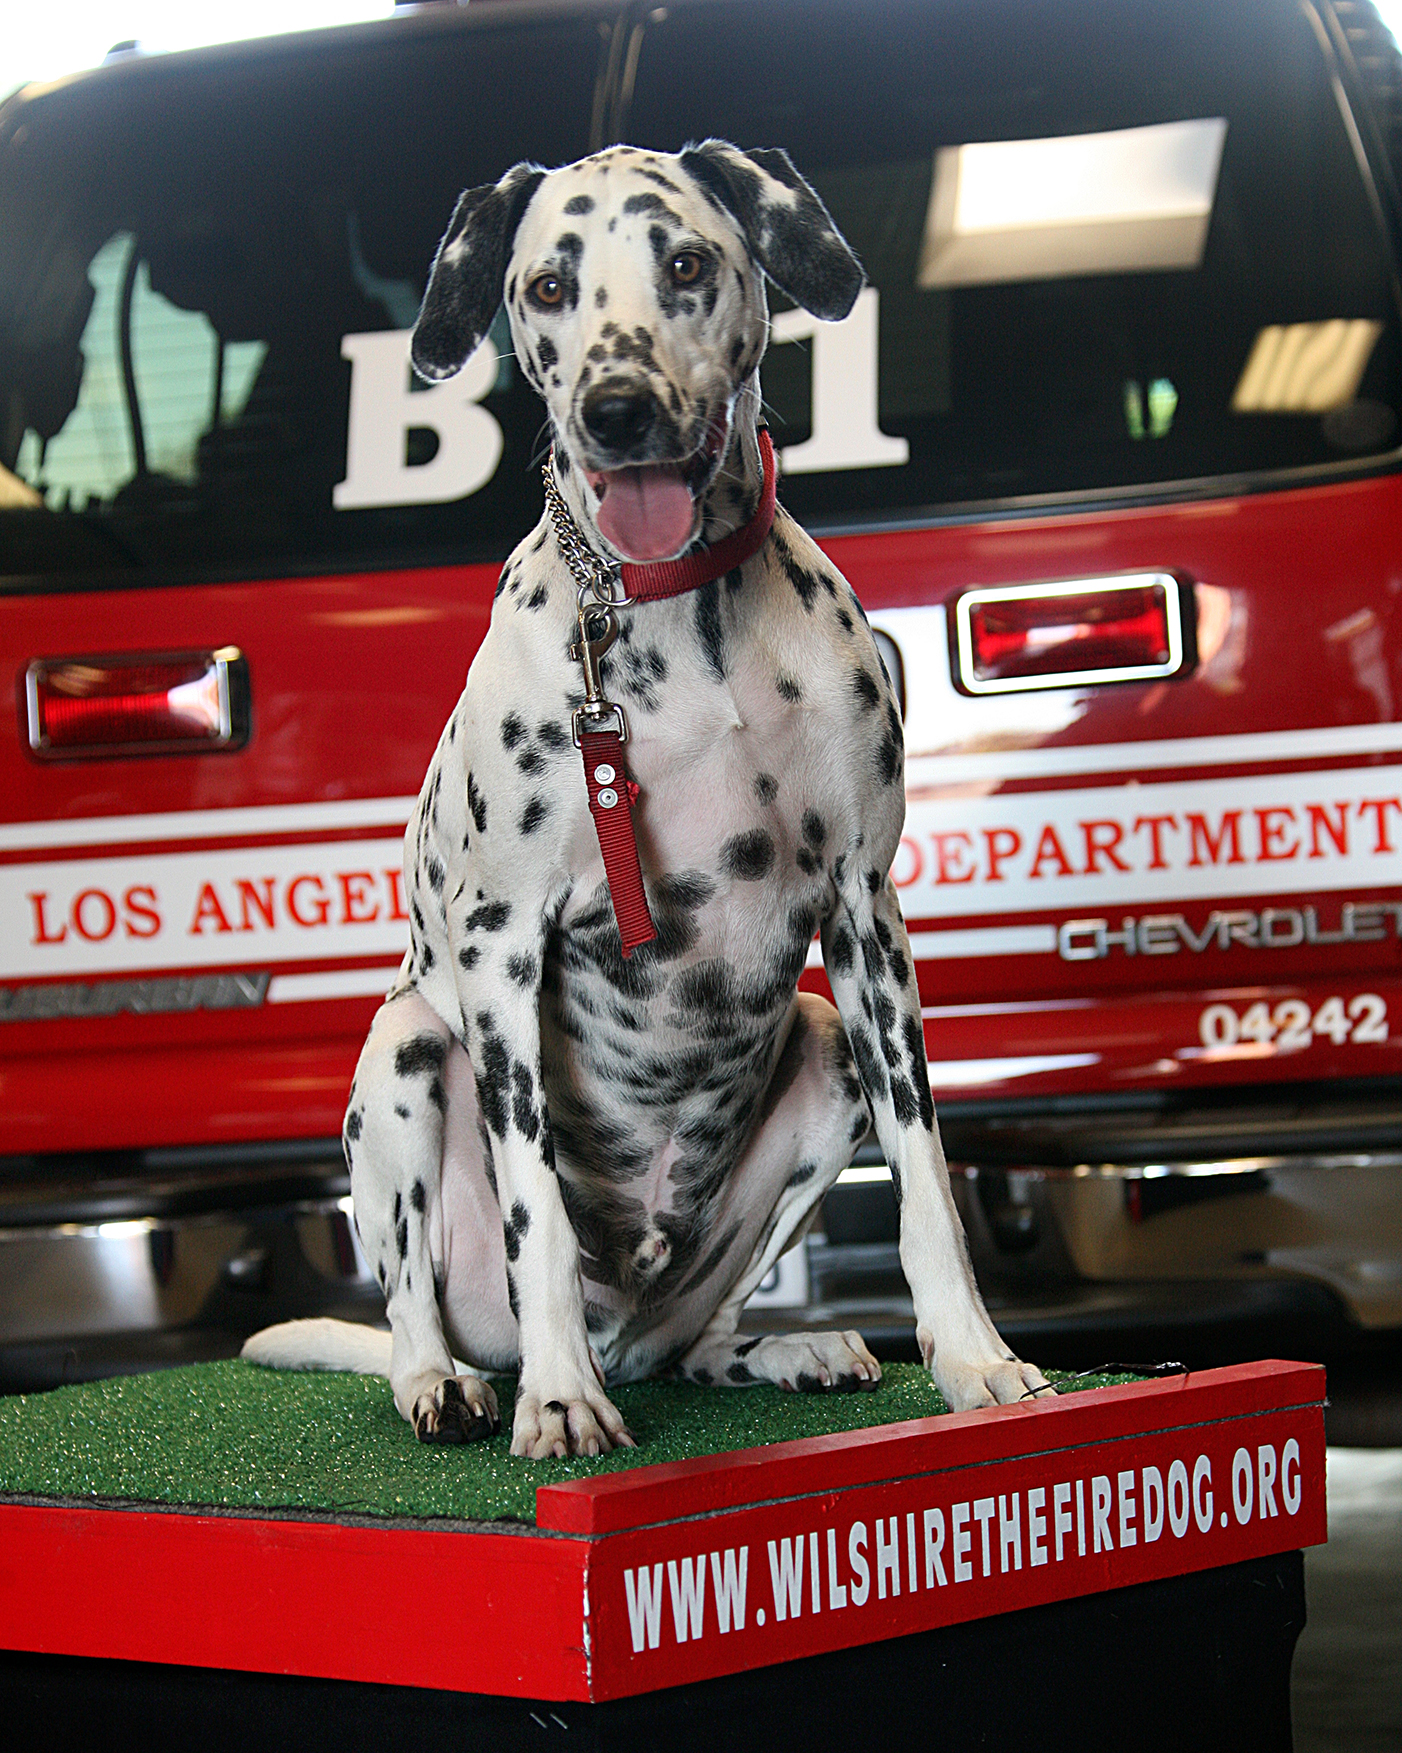 "Will" - Wilshire the Fire Dog